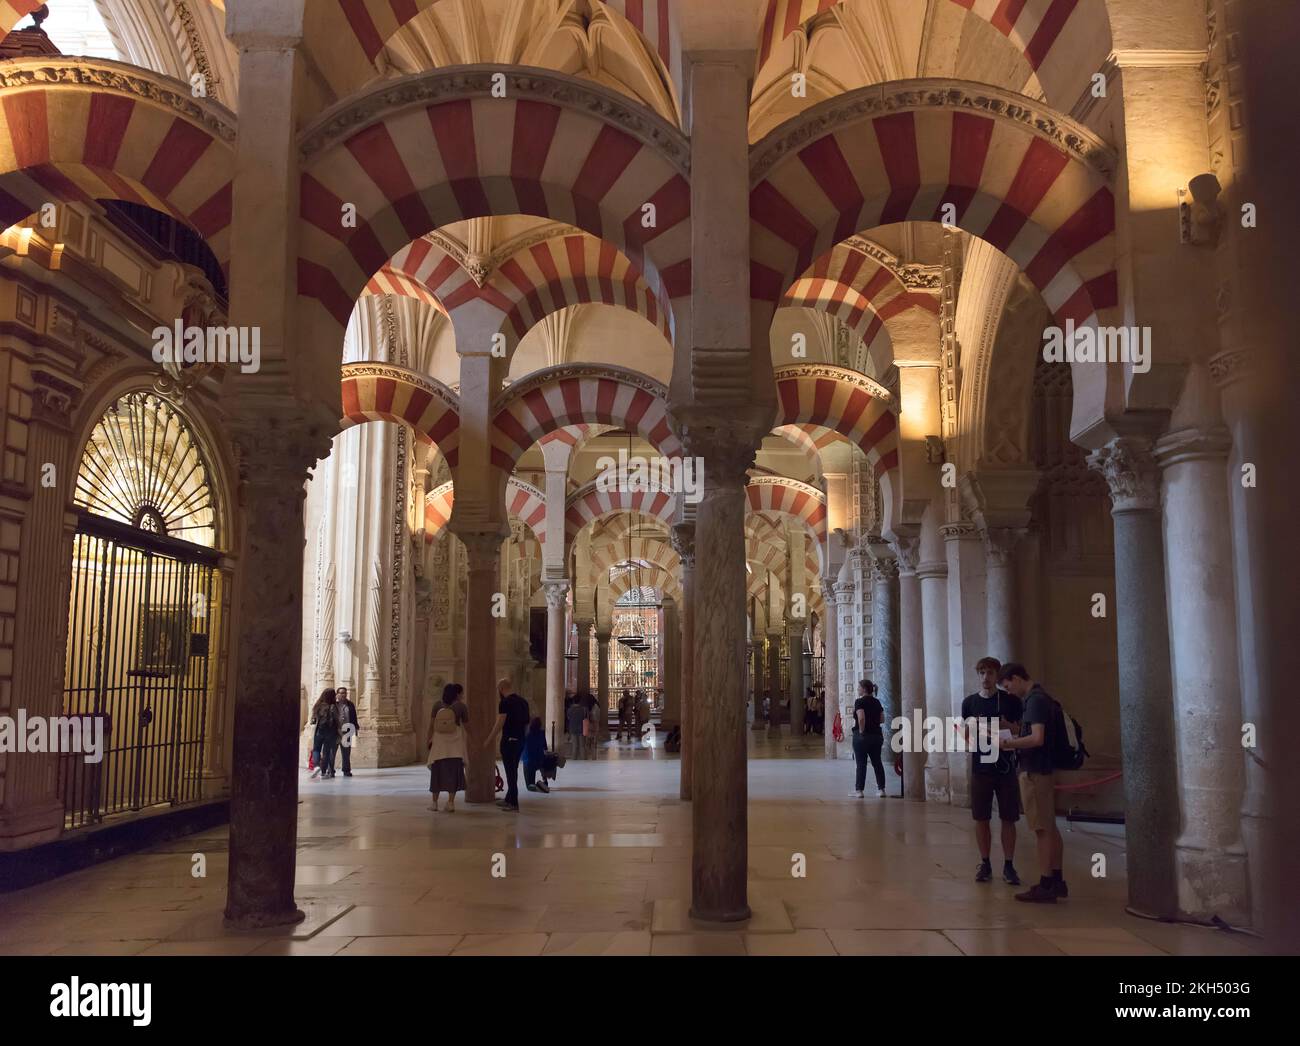 Pillars of the Mosque-Cathedral of Cordoba, Andalusia, Spain Stock Photo